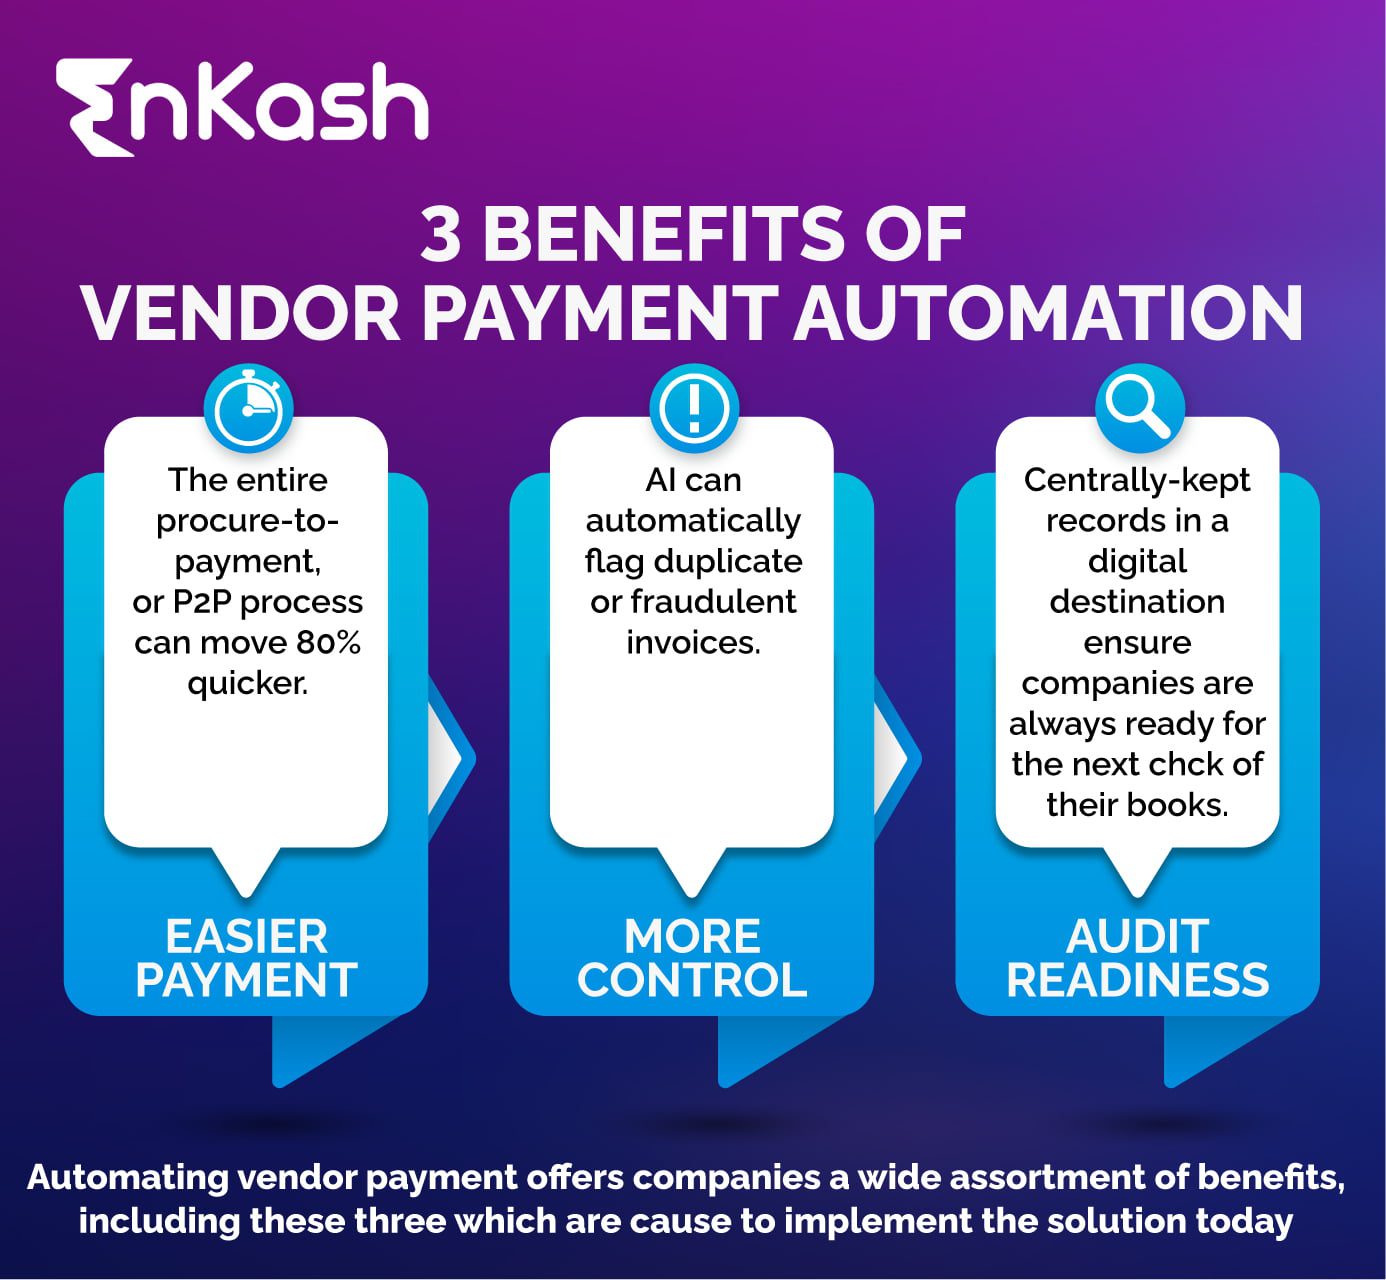 Enhance your Productivity with Vendor Payment Automation